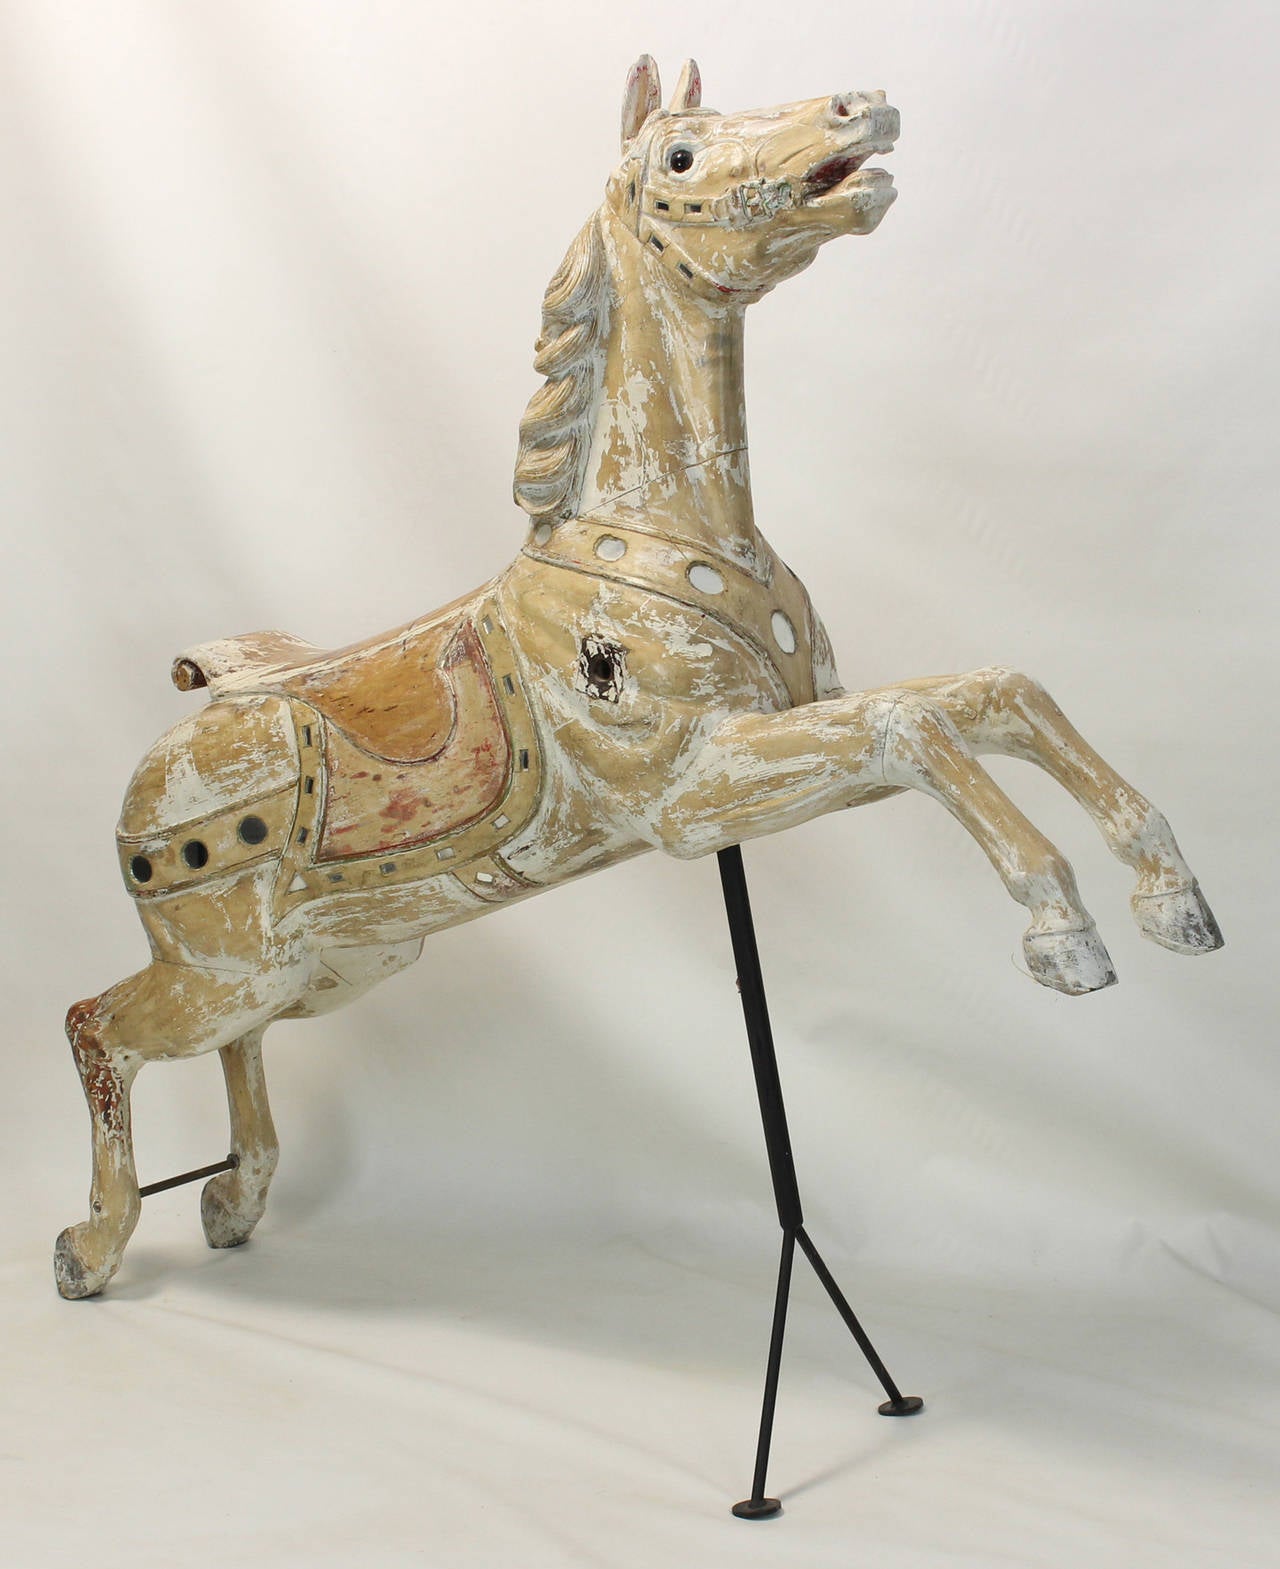 A large and charming carved wood carousel horse from a Long Island merry-go-round dating from the early 20th century. The horse retains traces of original paint as well as original inset mirror accents